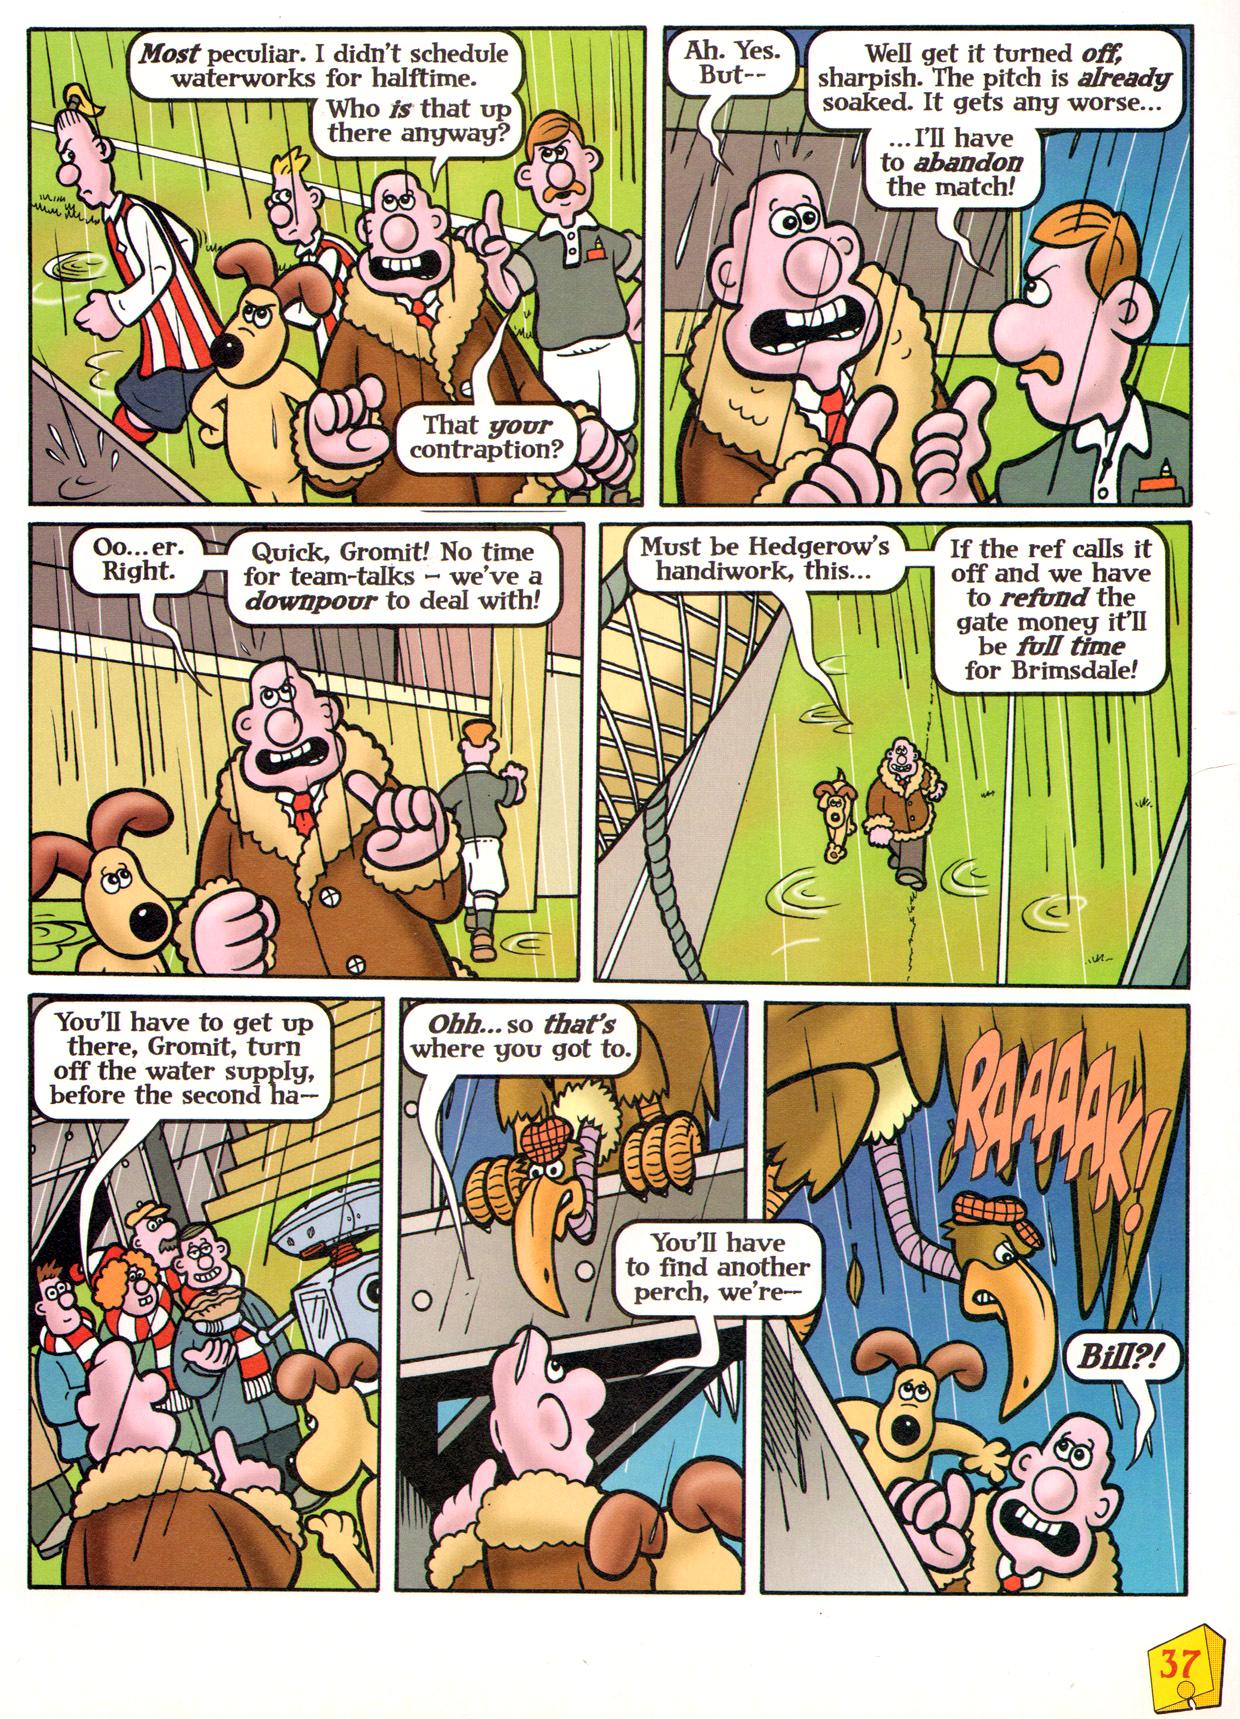 Read online Wallace & Gromit Comic comic -  Issue #11 - 35